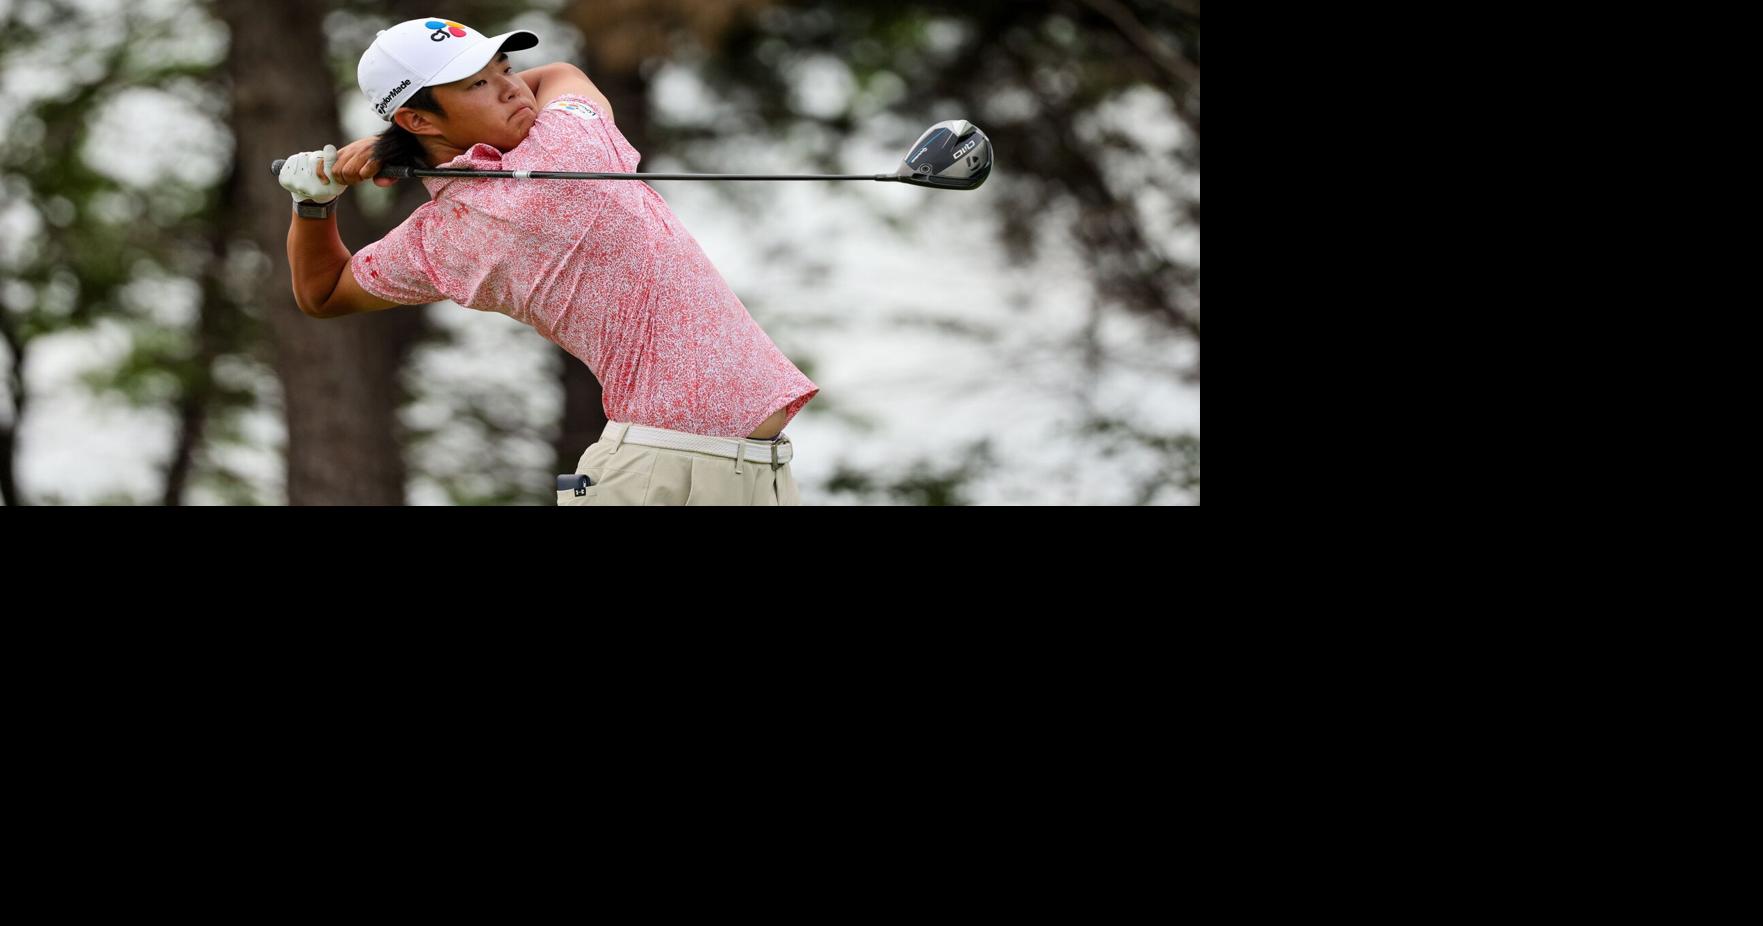 Kris Kim, 16-year-old amateur, impresses the golf world by making cut in PGA Tour debut